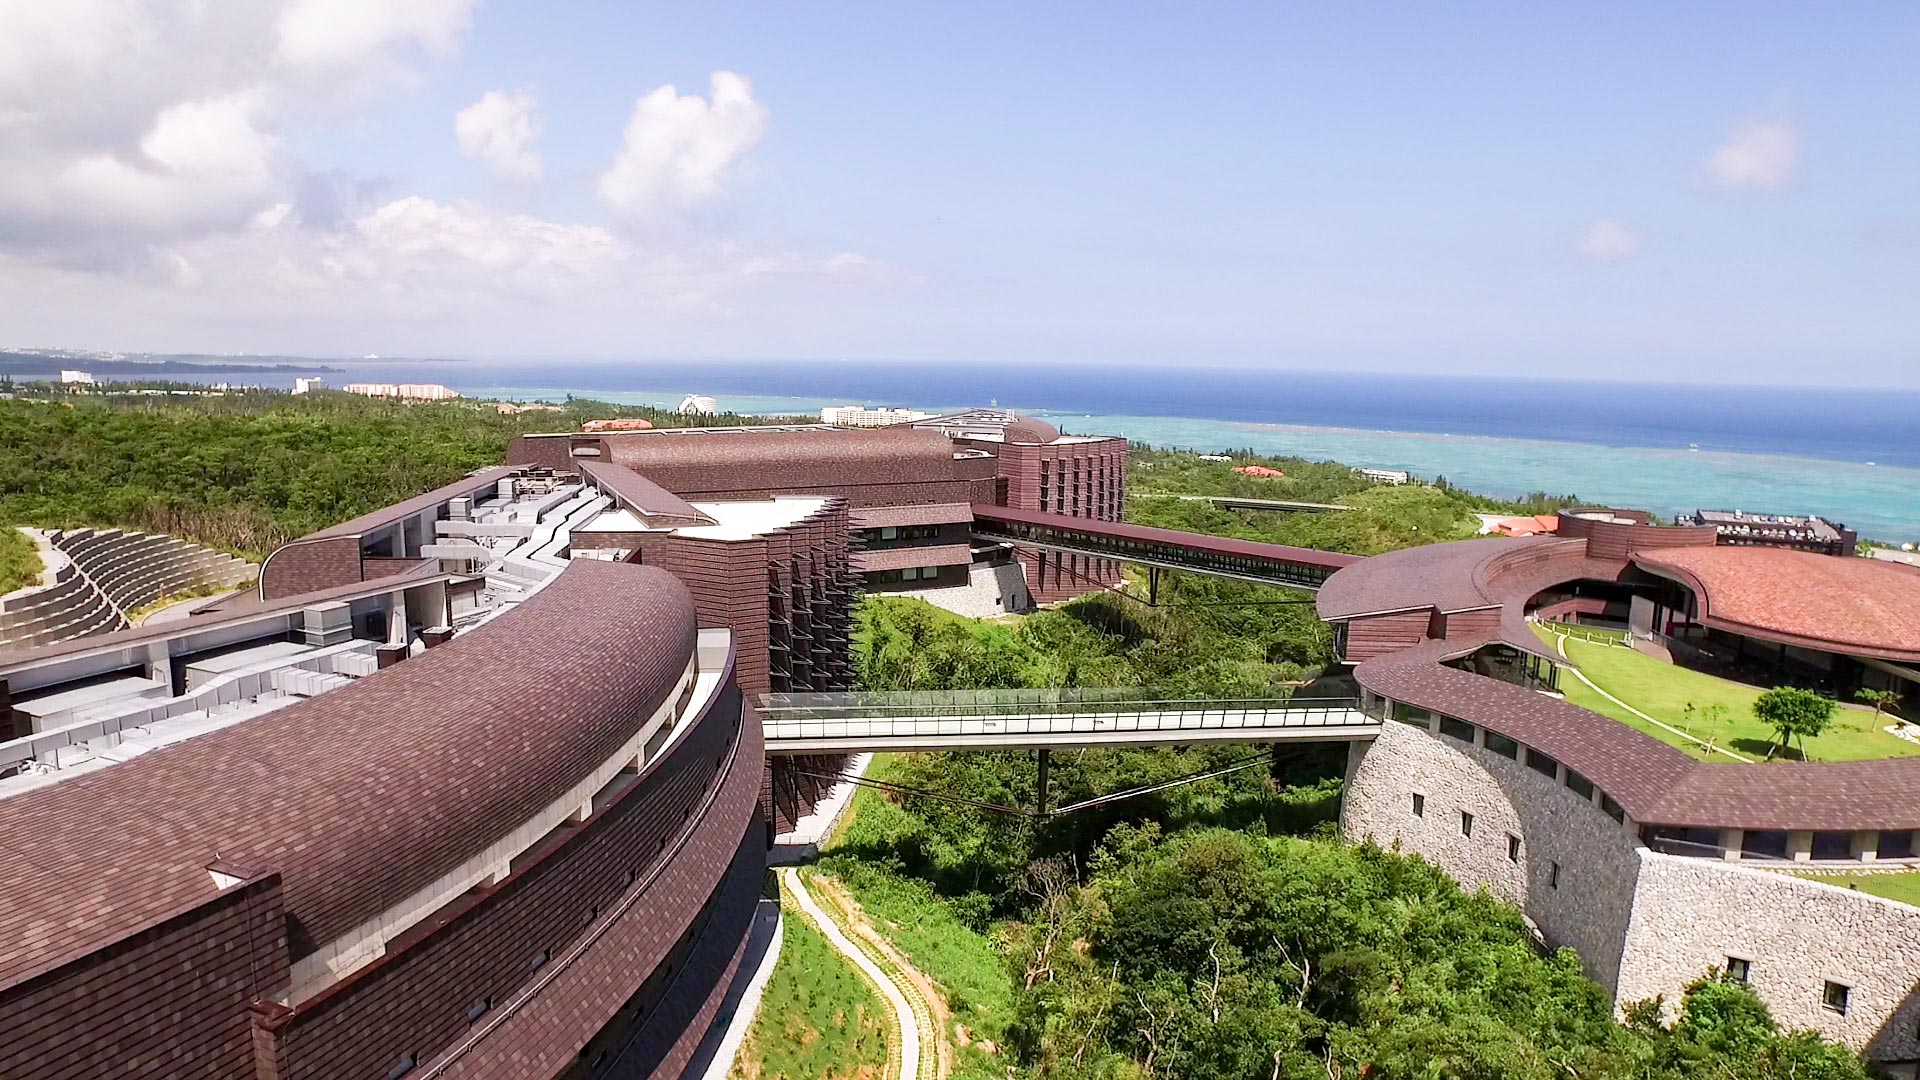 Okinawa Institute of Science and Technology (OIST)